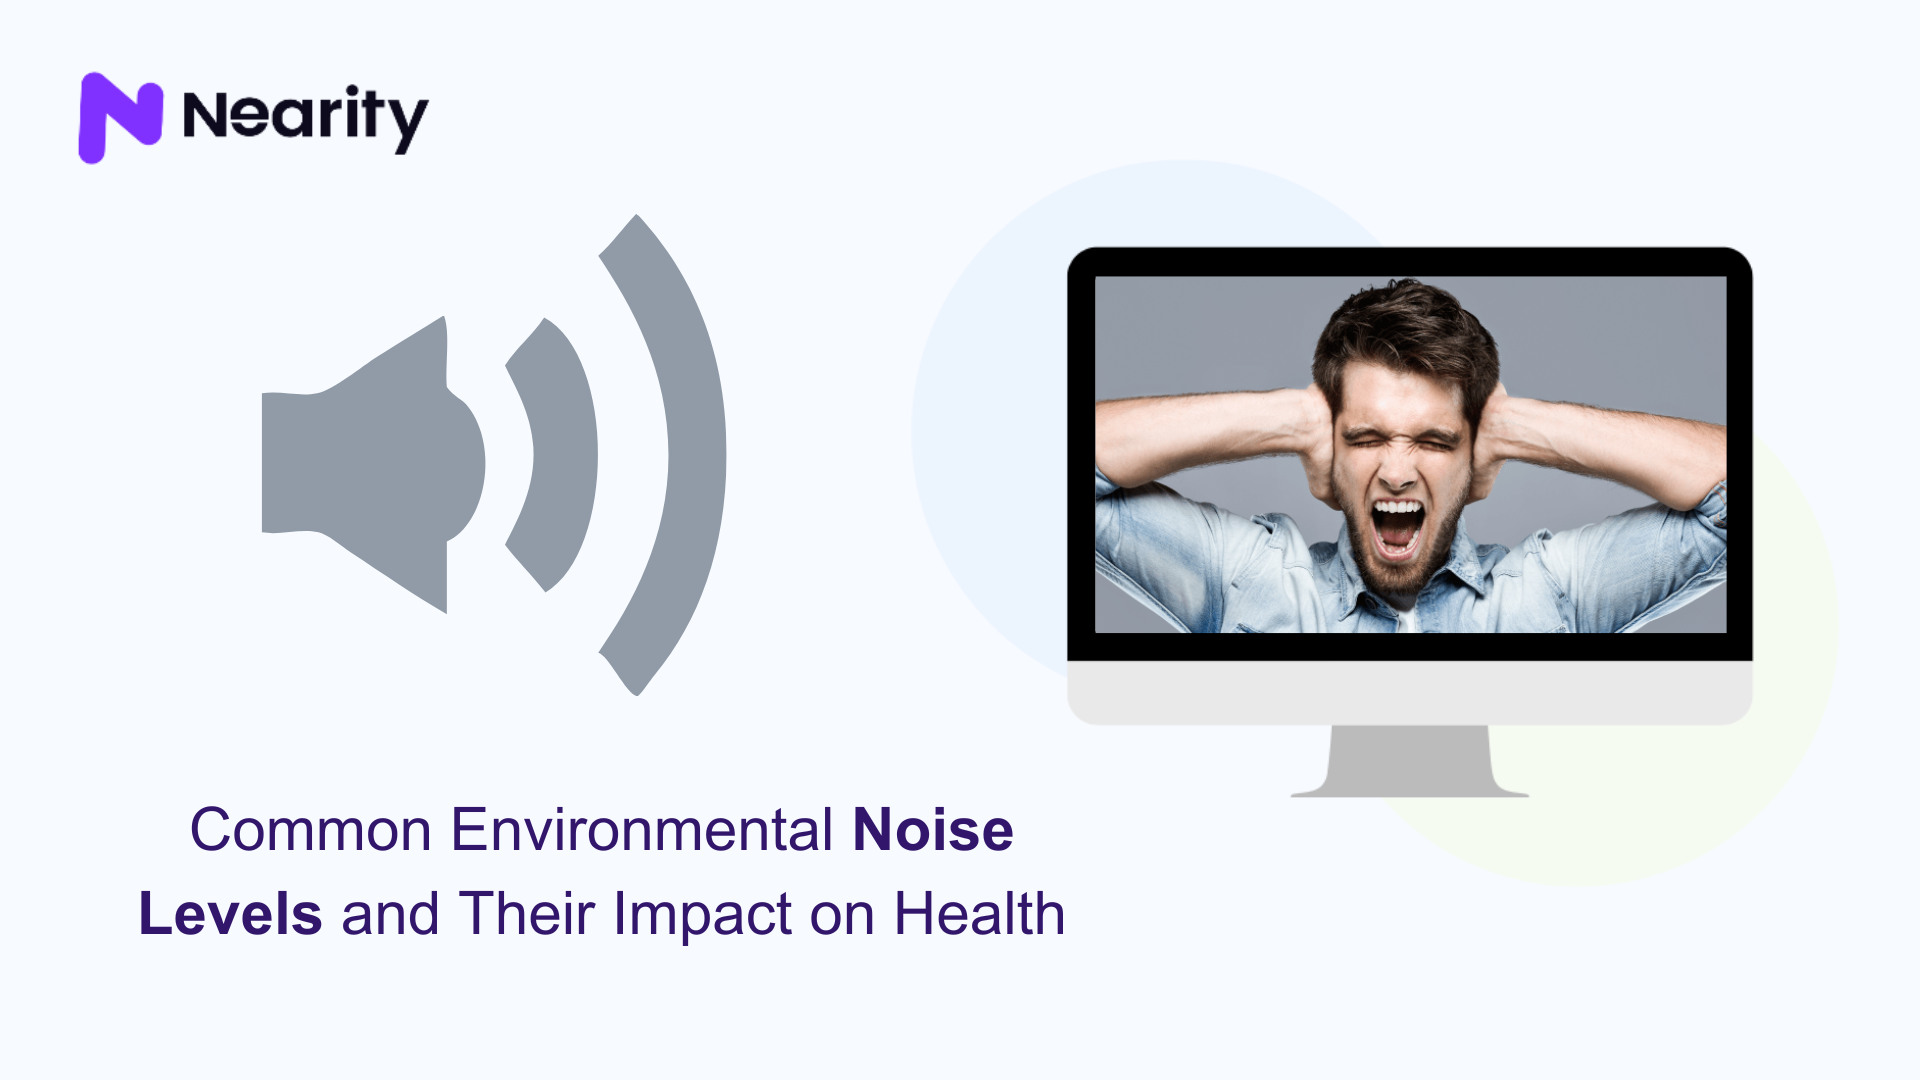 Common Environmental Noise Levels and Their Impact on Health